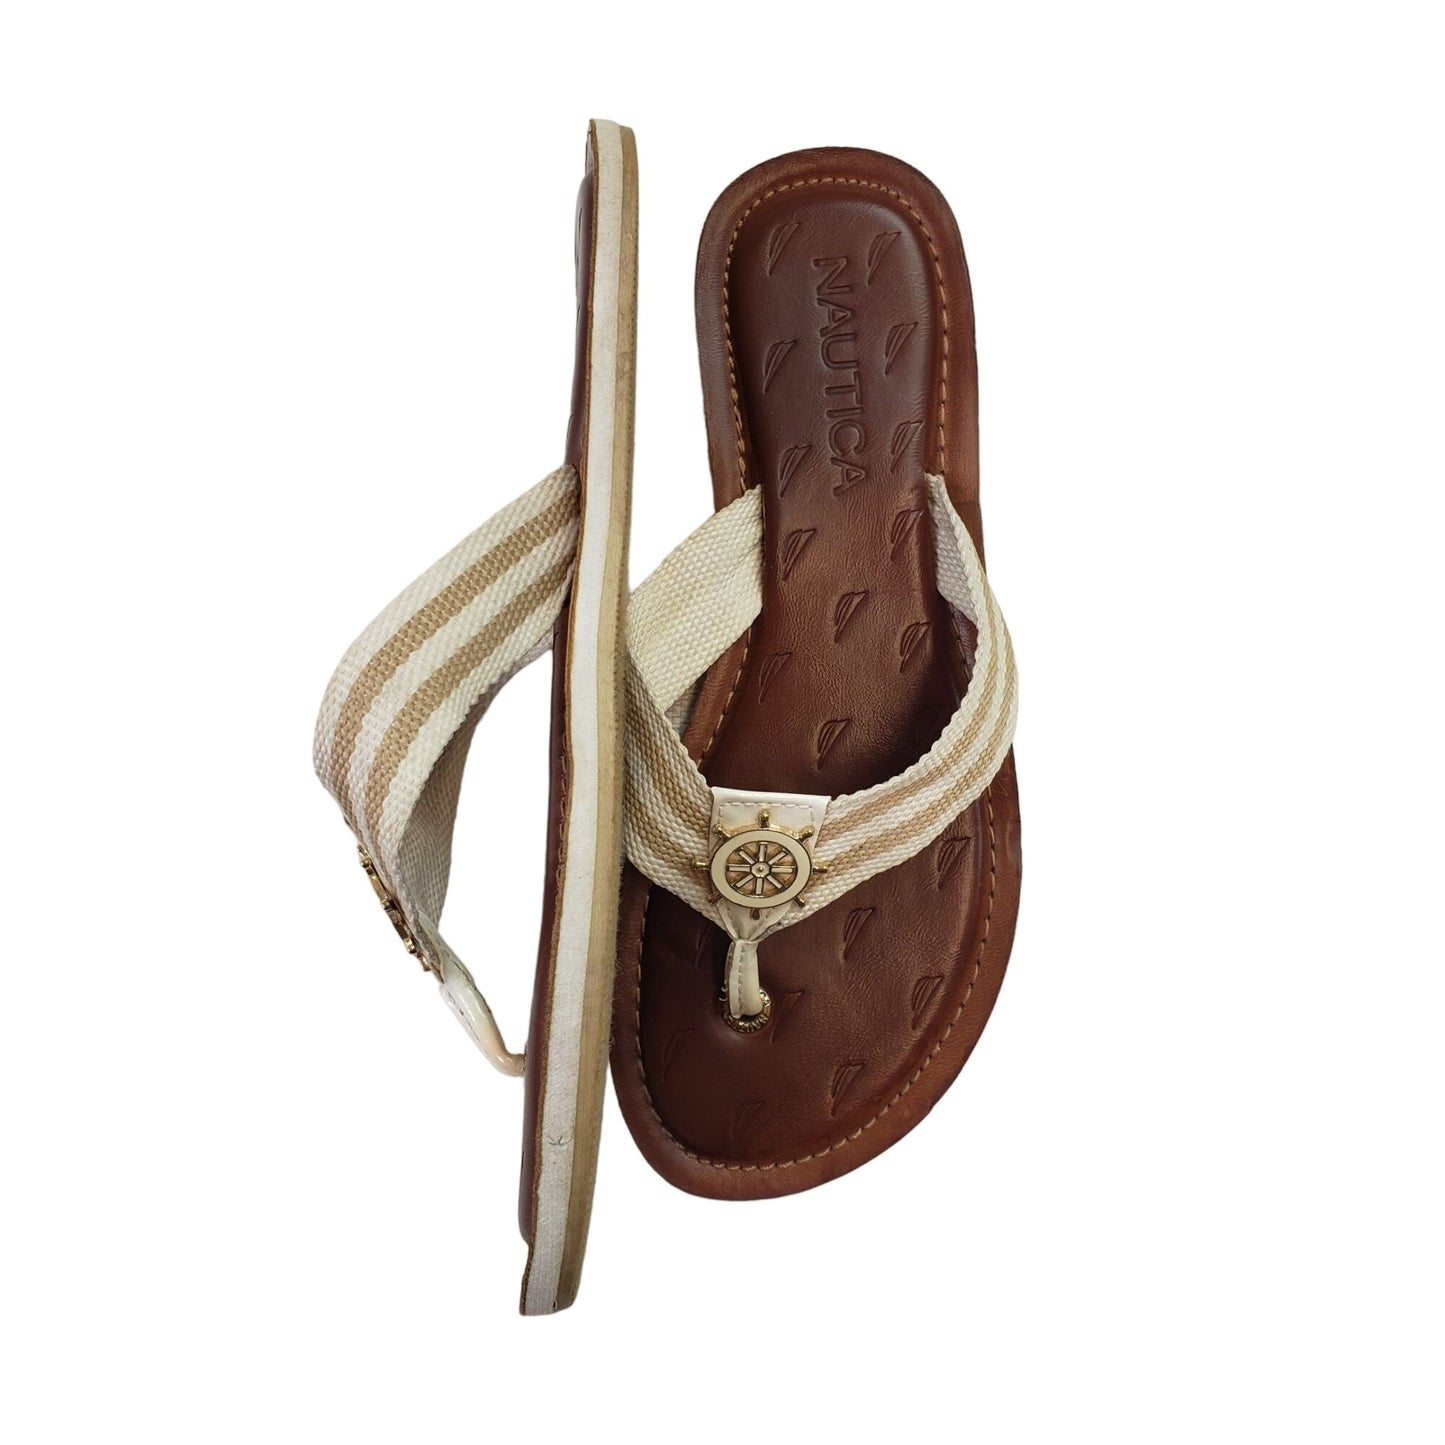 Nautica Leather and Canvas Thong Sandals Size 7 (est)